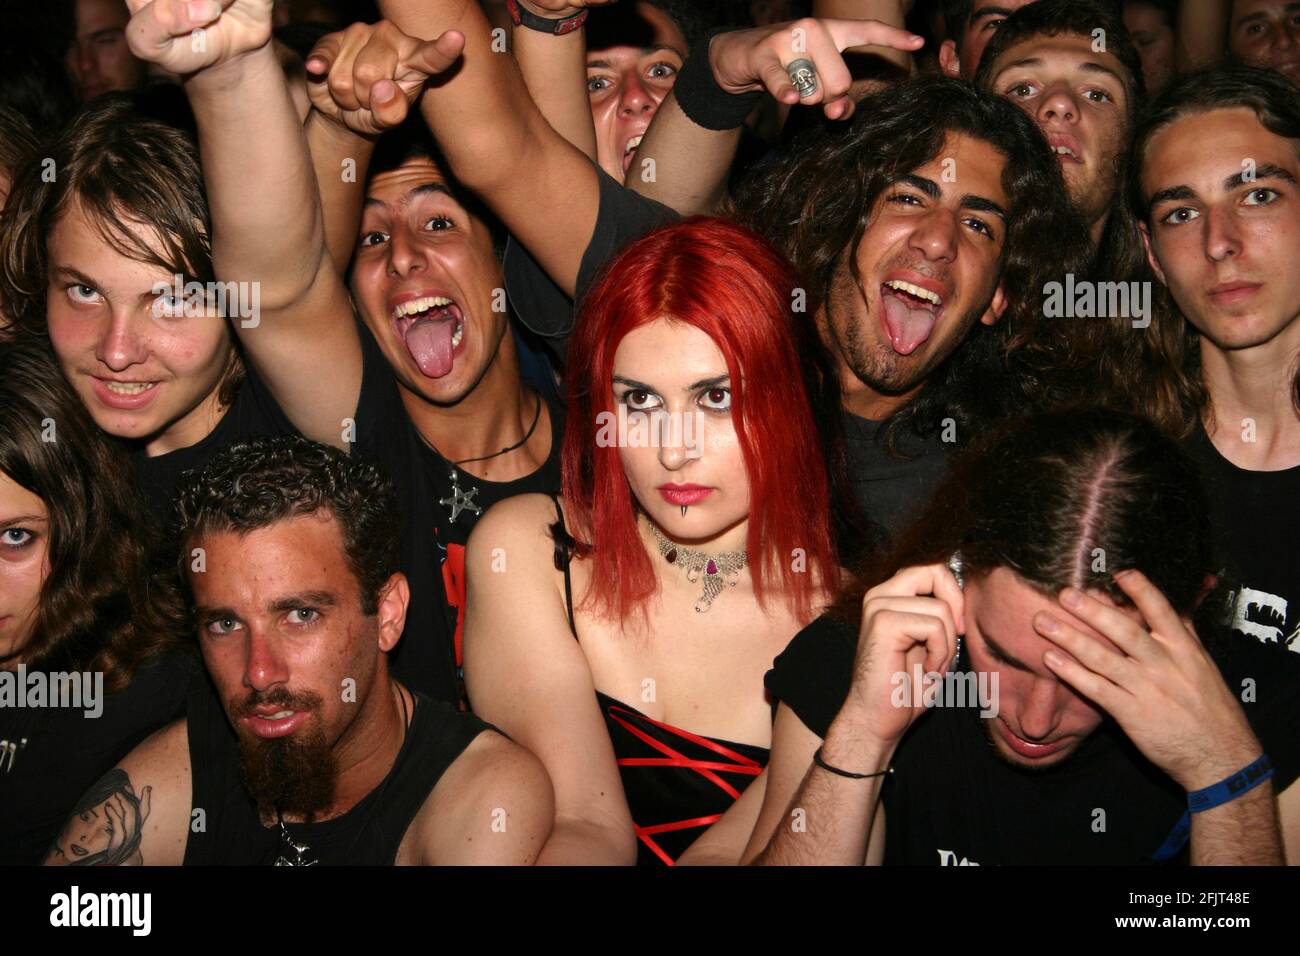 https://c8.alamy.com/comp/2FJT48E/crowd-and-audience-at-a-heavy-metal-rock-performance-photographed-in-israel-2FJT48E.jpg